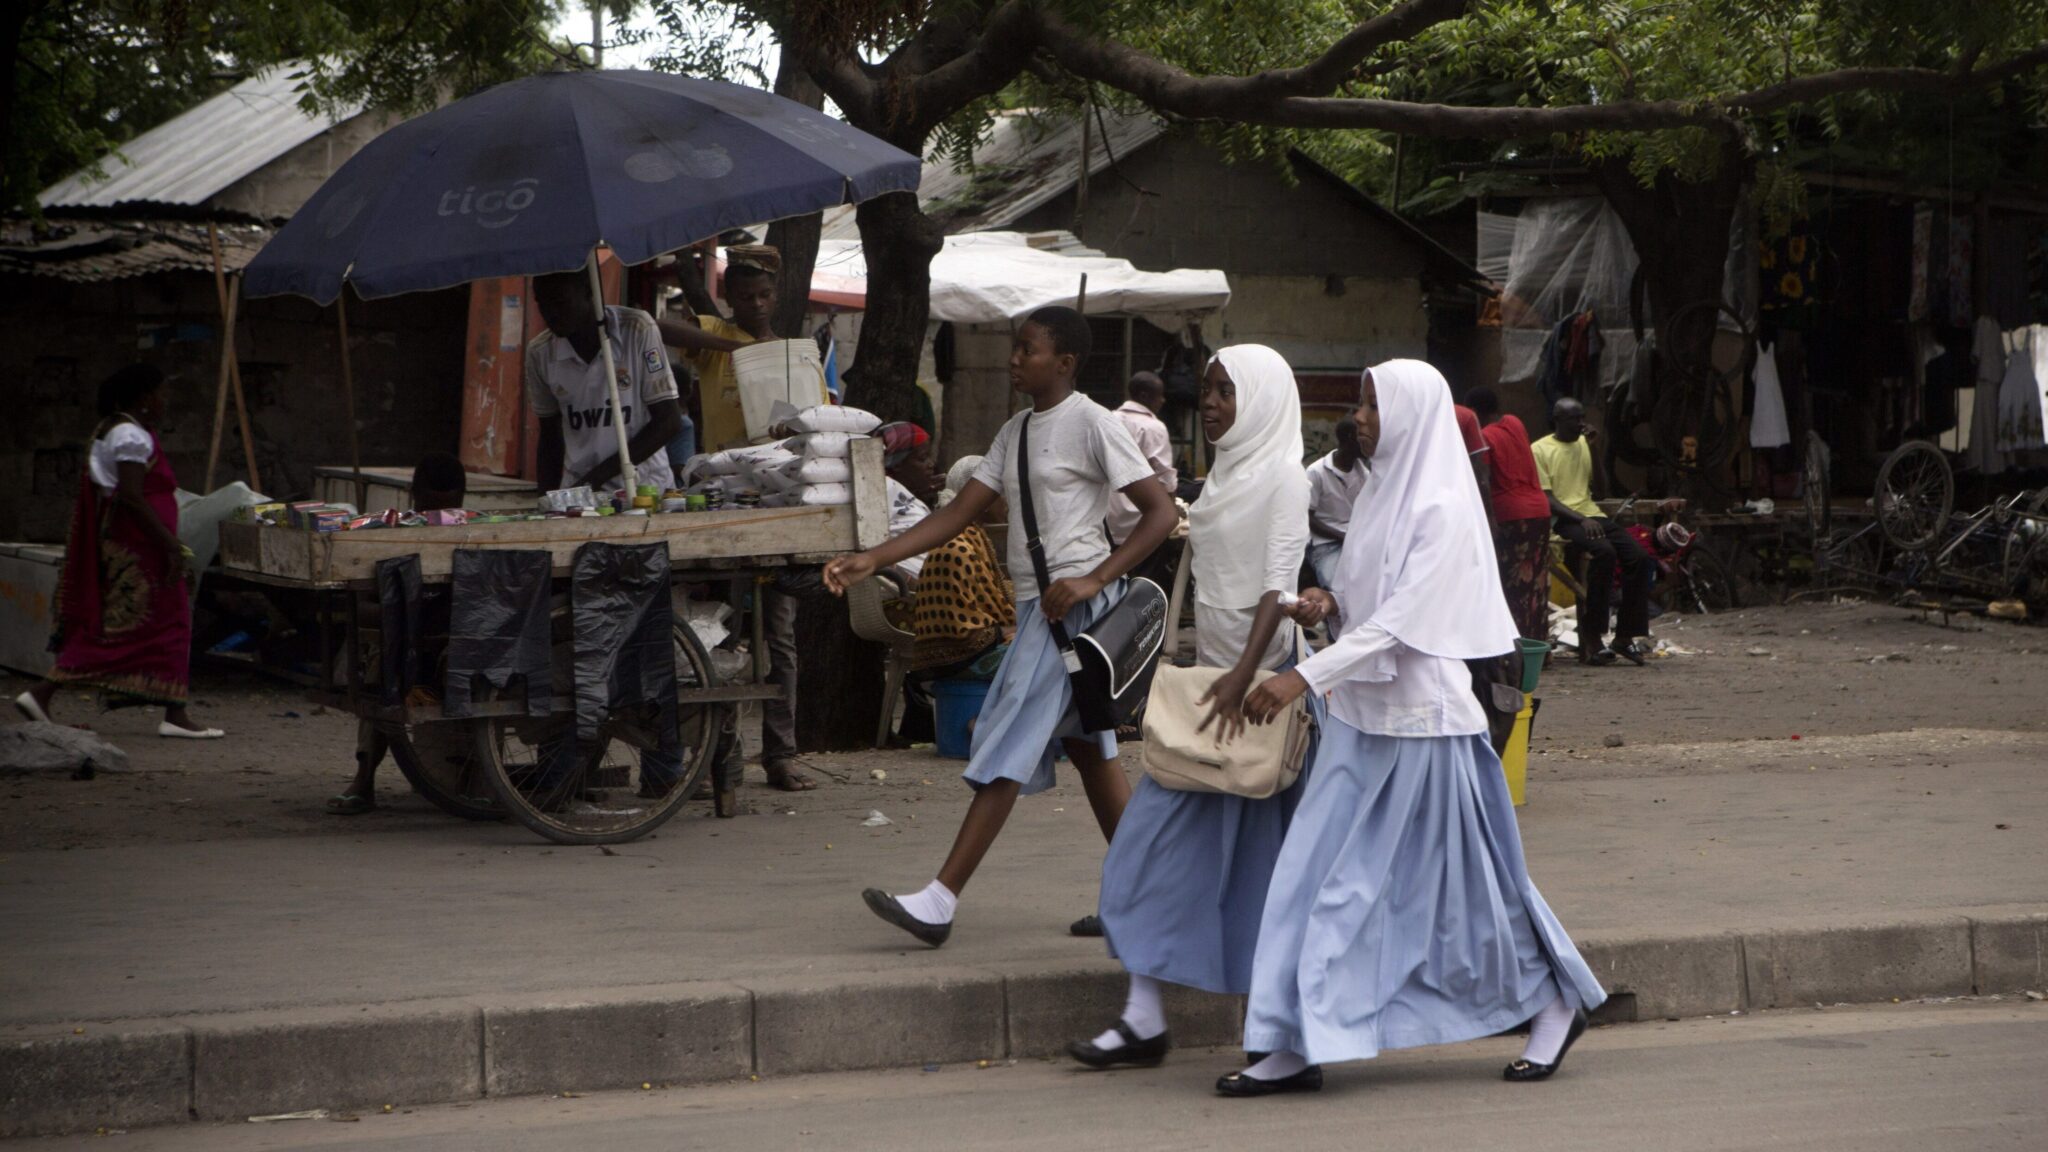 Africa: Pregnant Girls, Young Mothers Barred from School